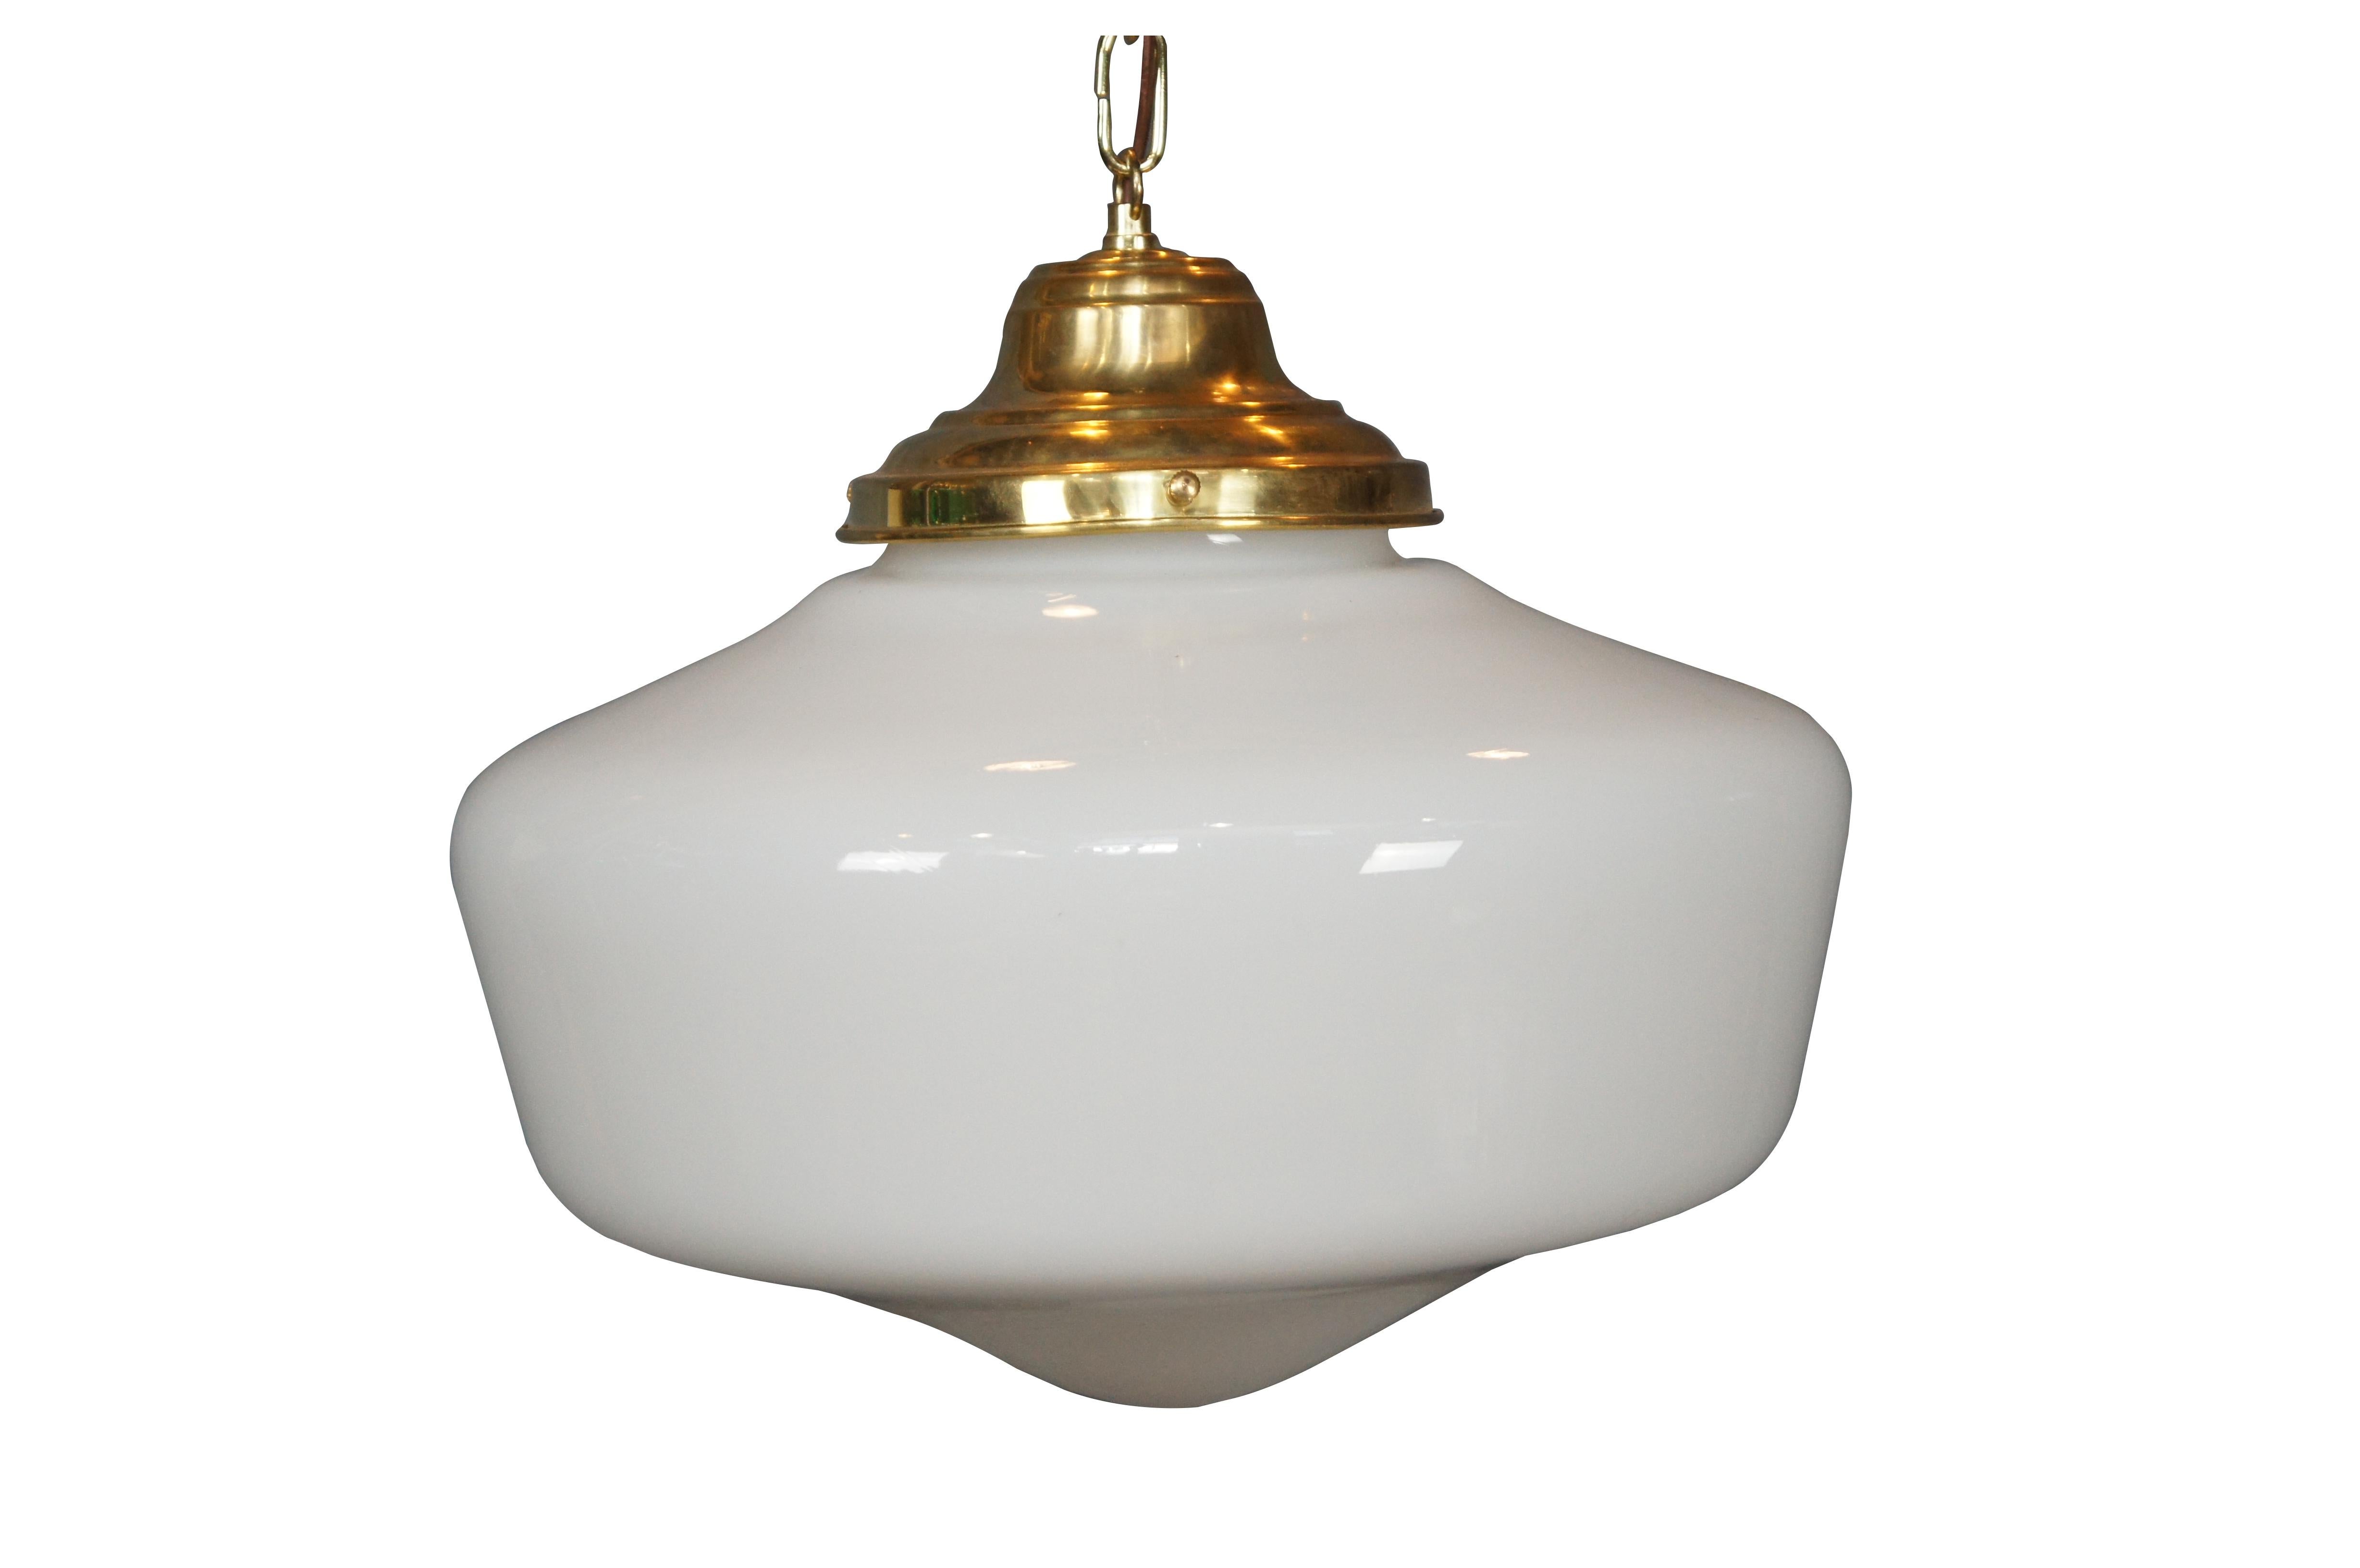  vintage art deco style schoolhouse pendant light with brass caps and milk glass globe. Wired with plug.

Dimensions:
15